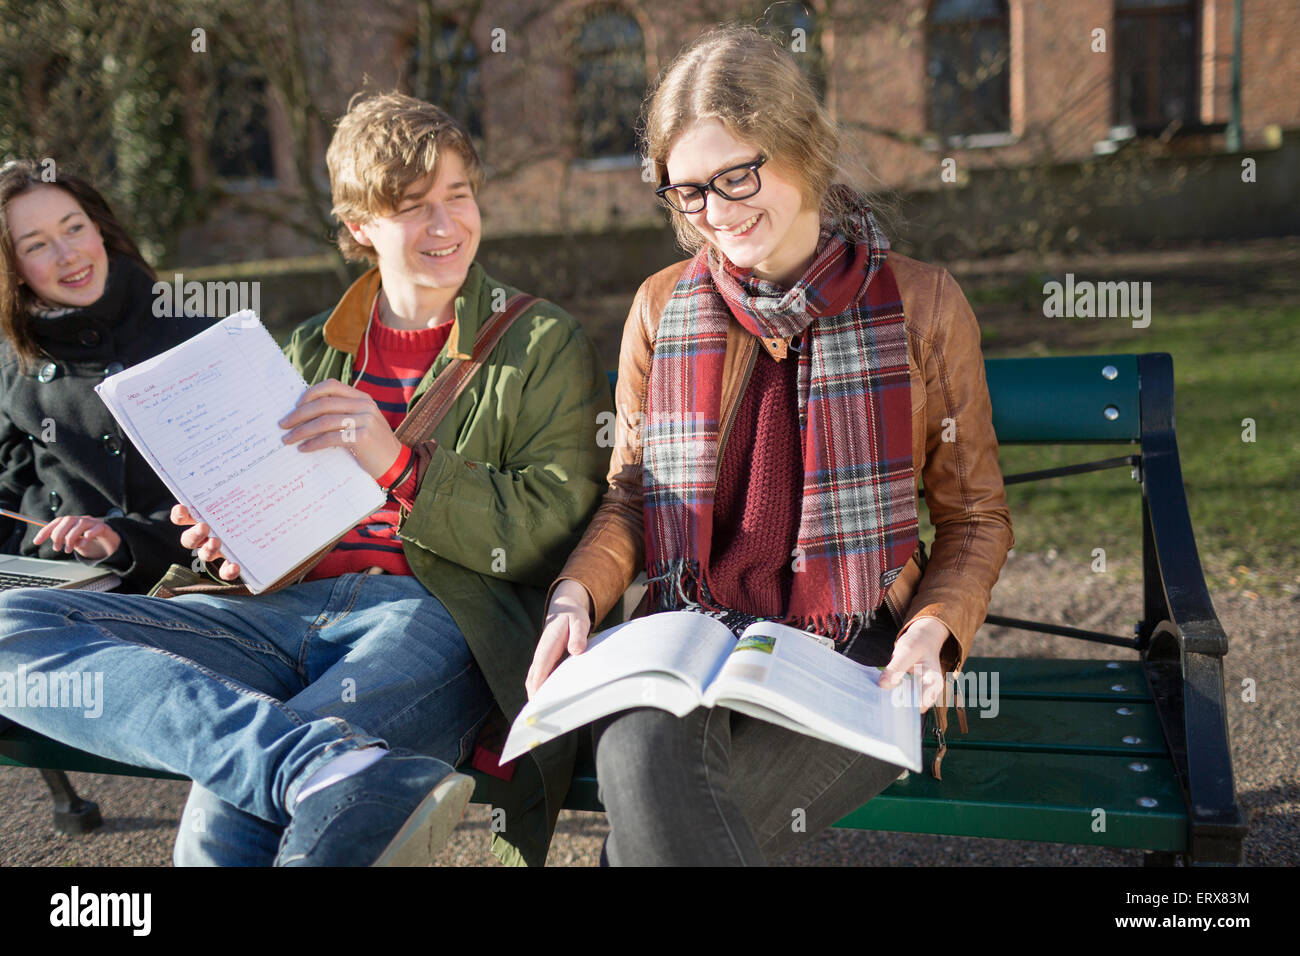 Smiling teenage friends studying in college campus Stock Photo